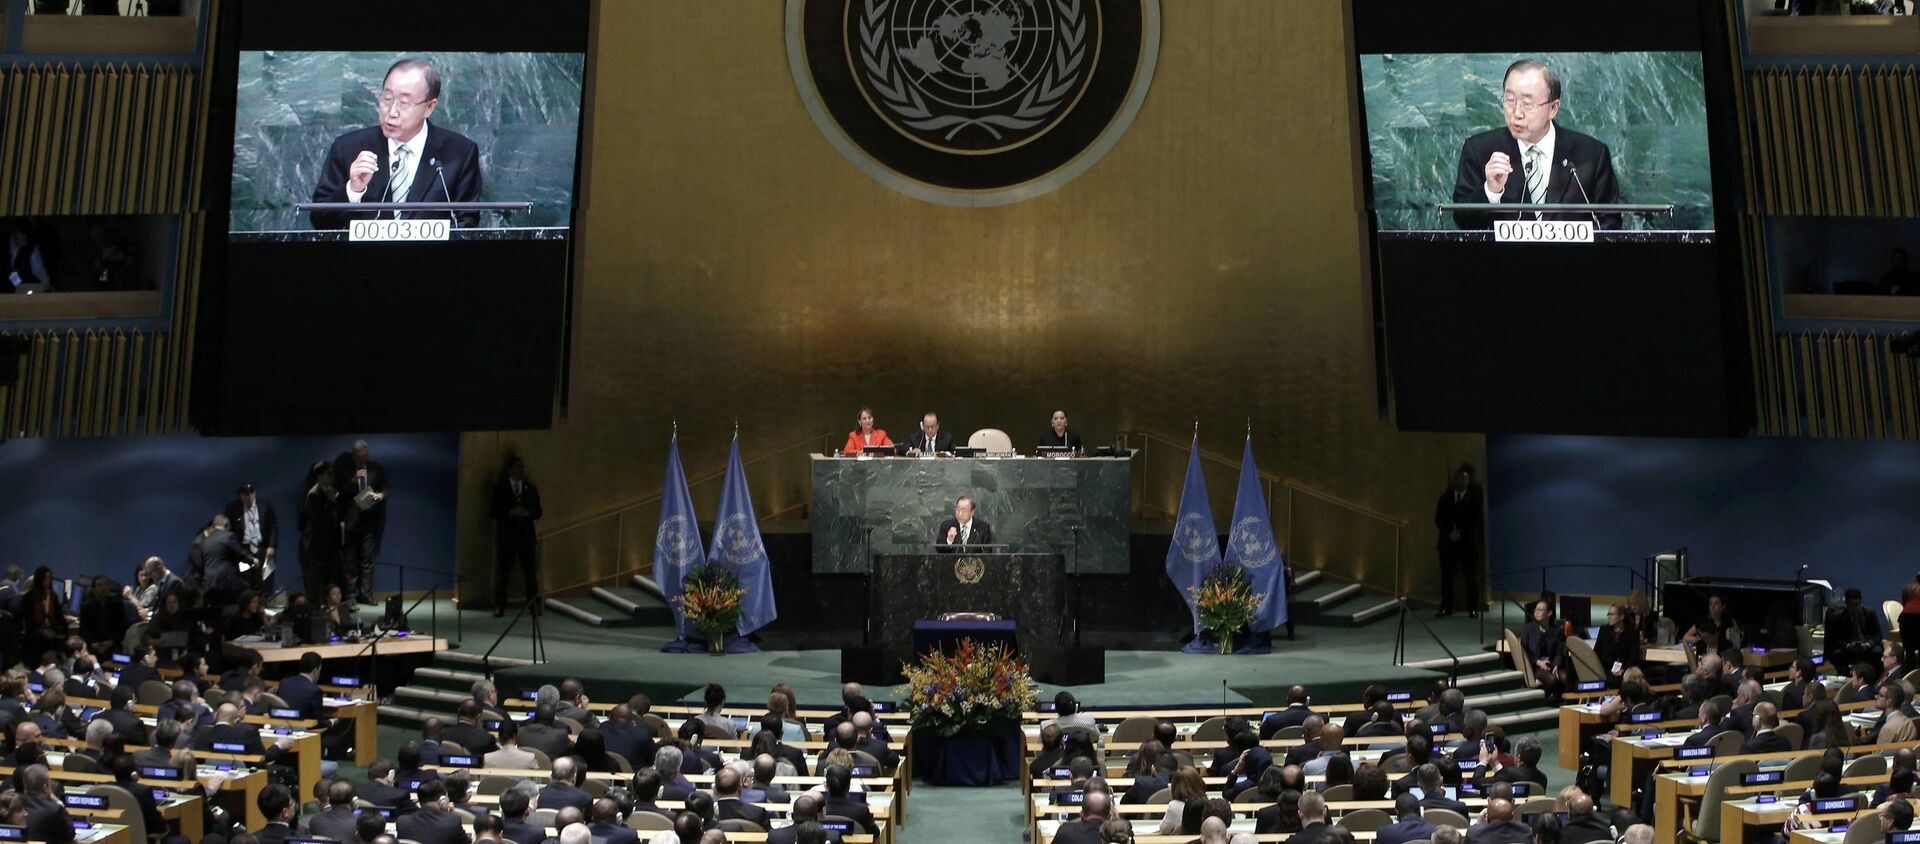 Ban Ki-moon, Secretary-General of the United Nations, delivers his opening remarks at the Paris Agreement signing ceremony on climate change at the United Nations Headquarters in Manhattan, New York, U.S., April 22, 2016 - Sputnik International, 1920, 11.11.2020